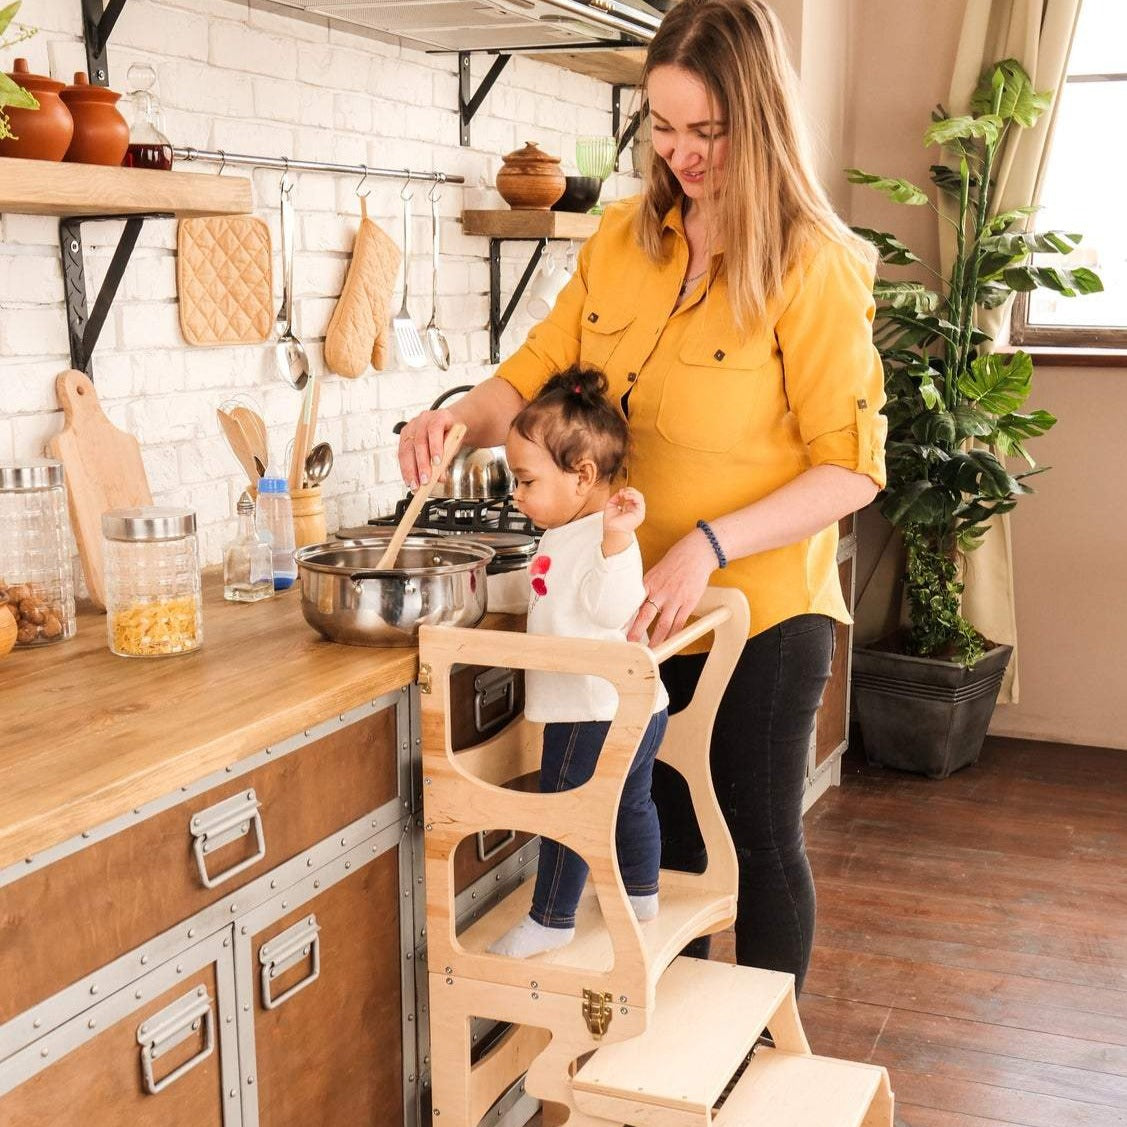 Mom with a child in the kitchen. The child stands on a high chair and reaches the countertop. Kitchen step stool chair